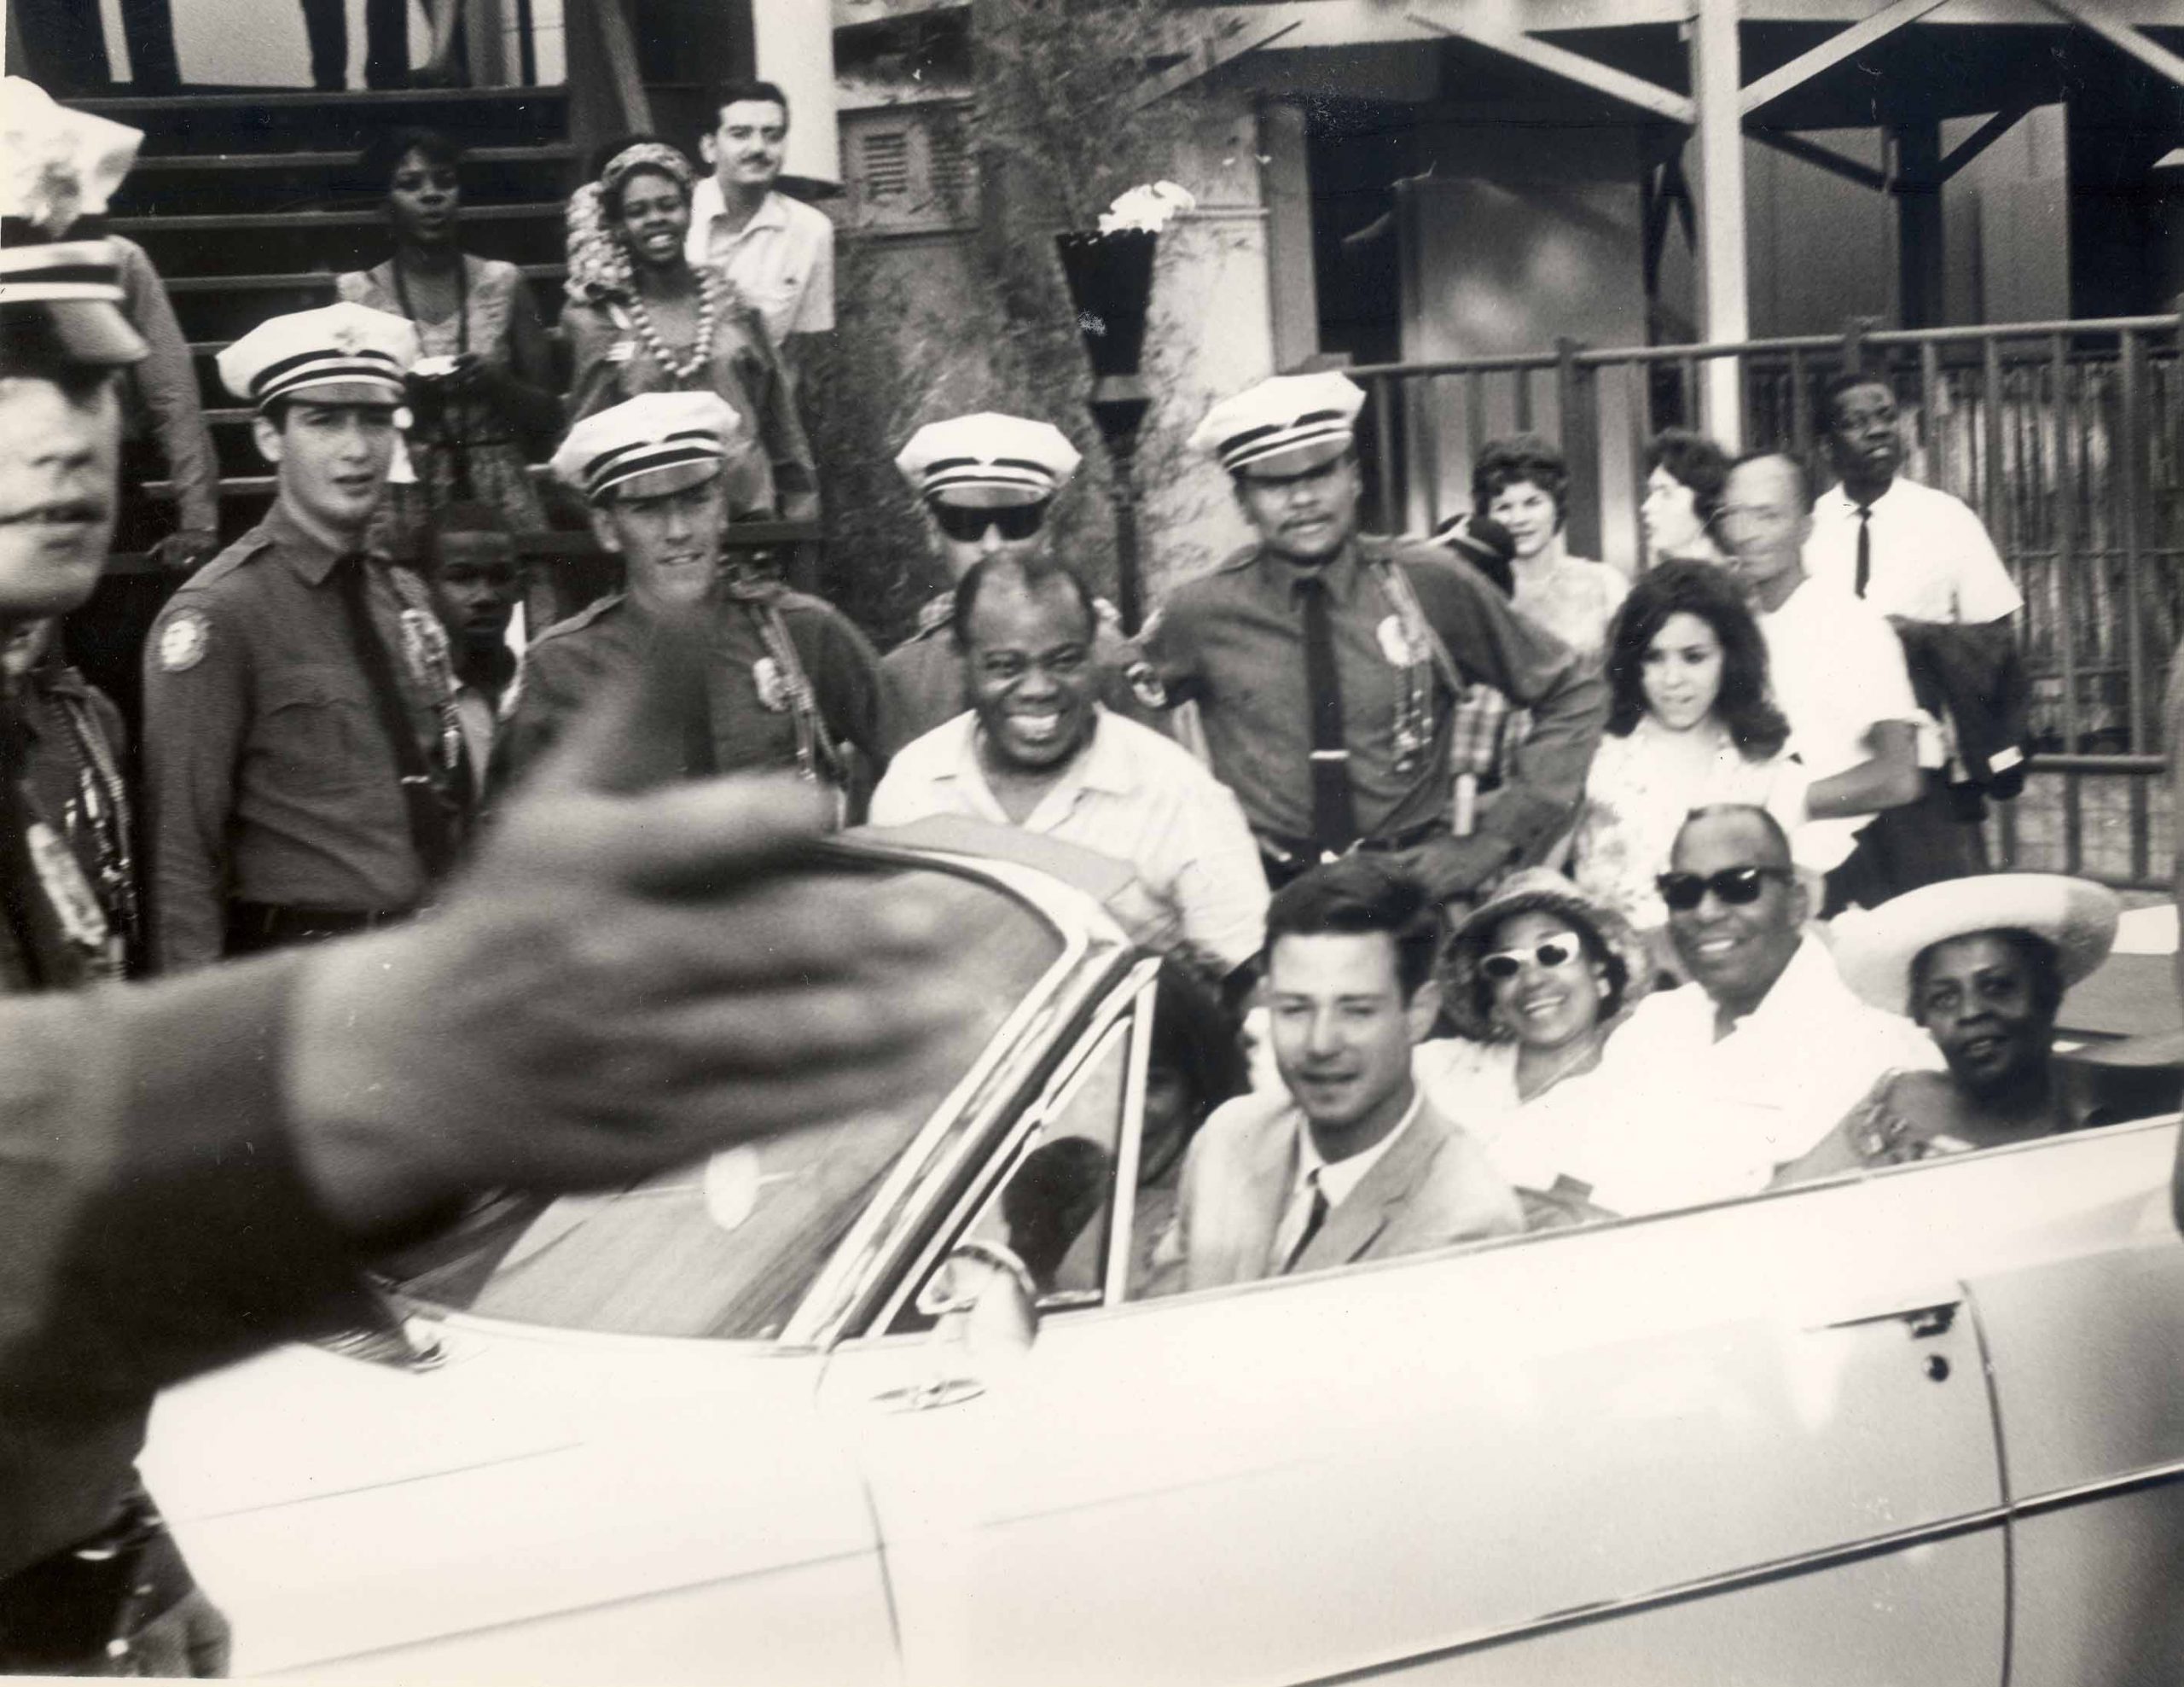 A black and white photograph of Louis Armstrong cheesin’ his pearly whites. His gaze is towards another camera lens. Behind him is a row of police officers. Together, with a crowd of onlookers, they are captured standing. While the police officers are on the curb, Louie is crouching up out of a parked convertible, filled with seated passengers.